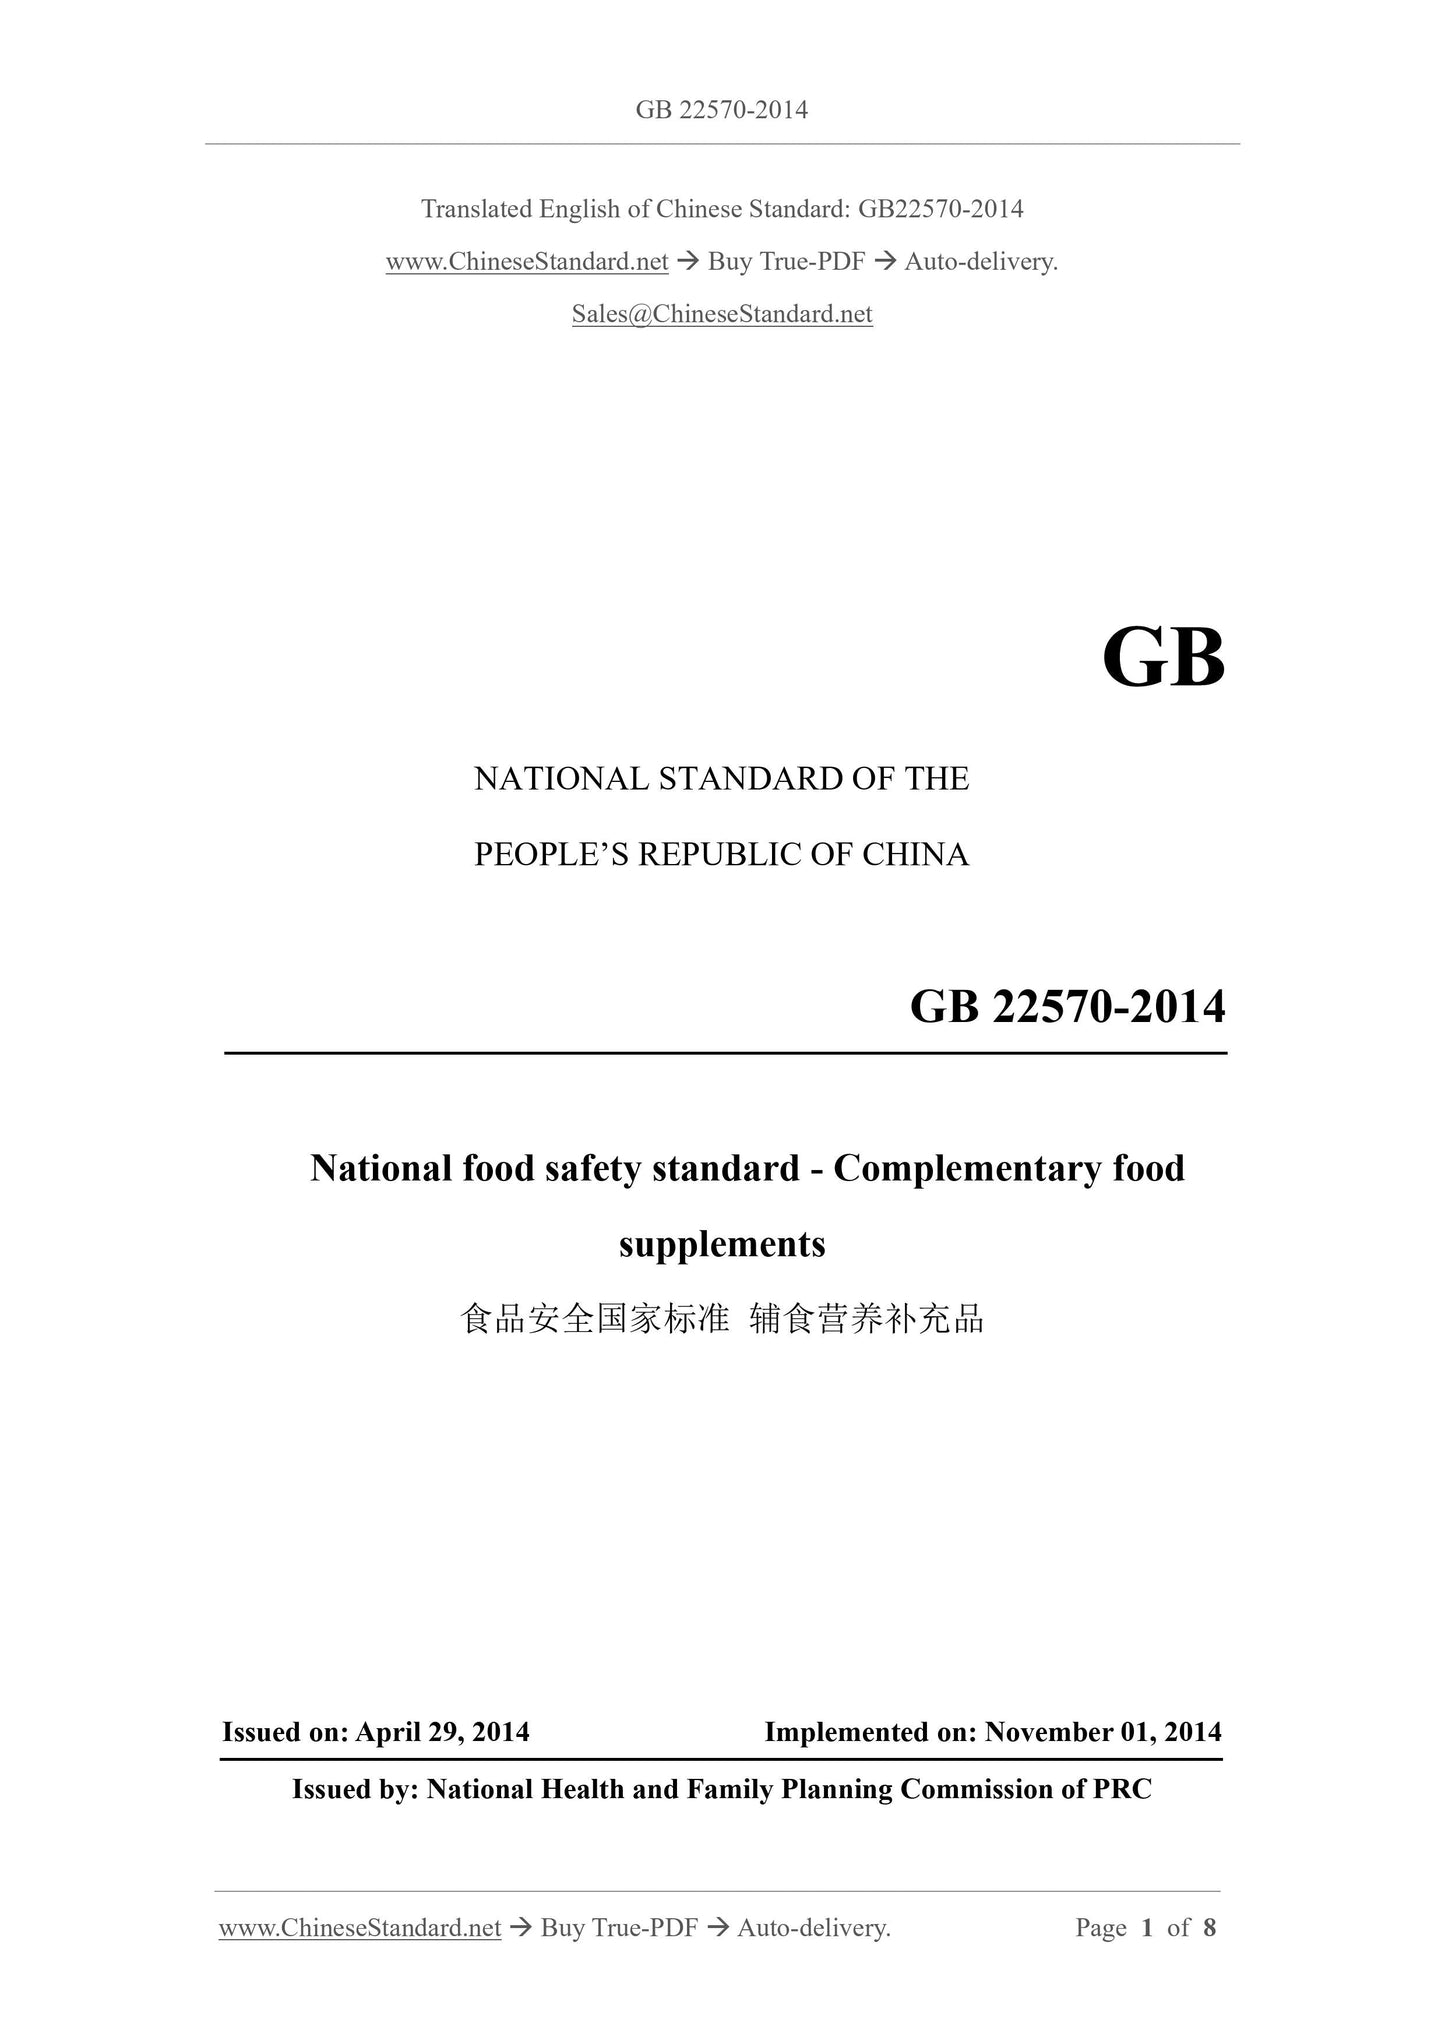 GB 22570-2014 Page 1